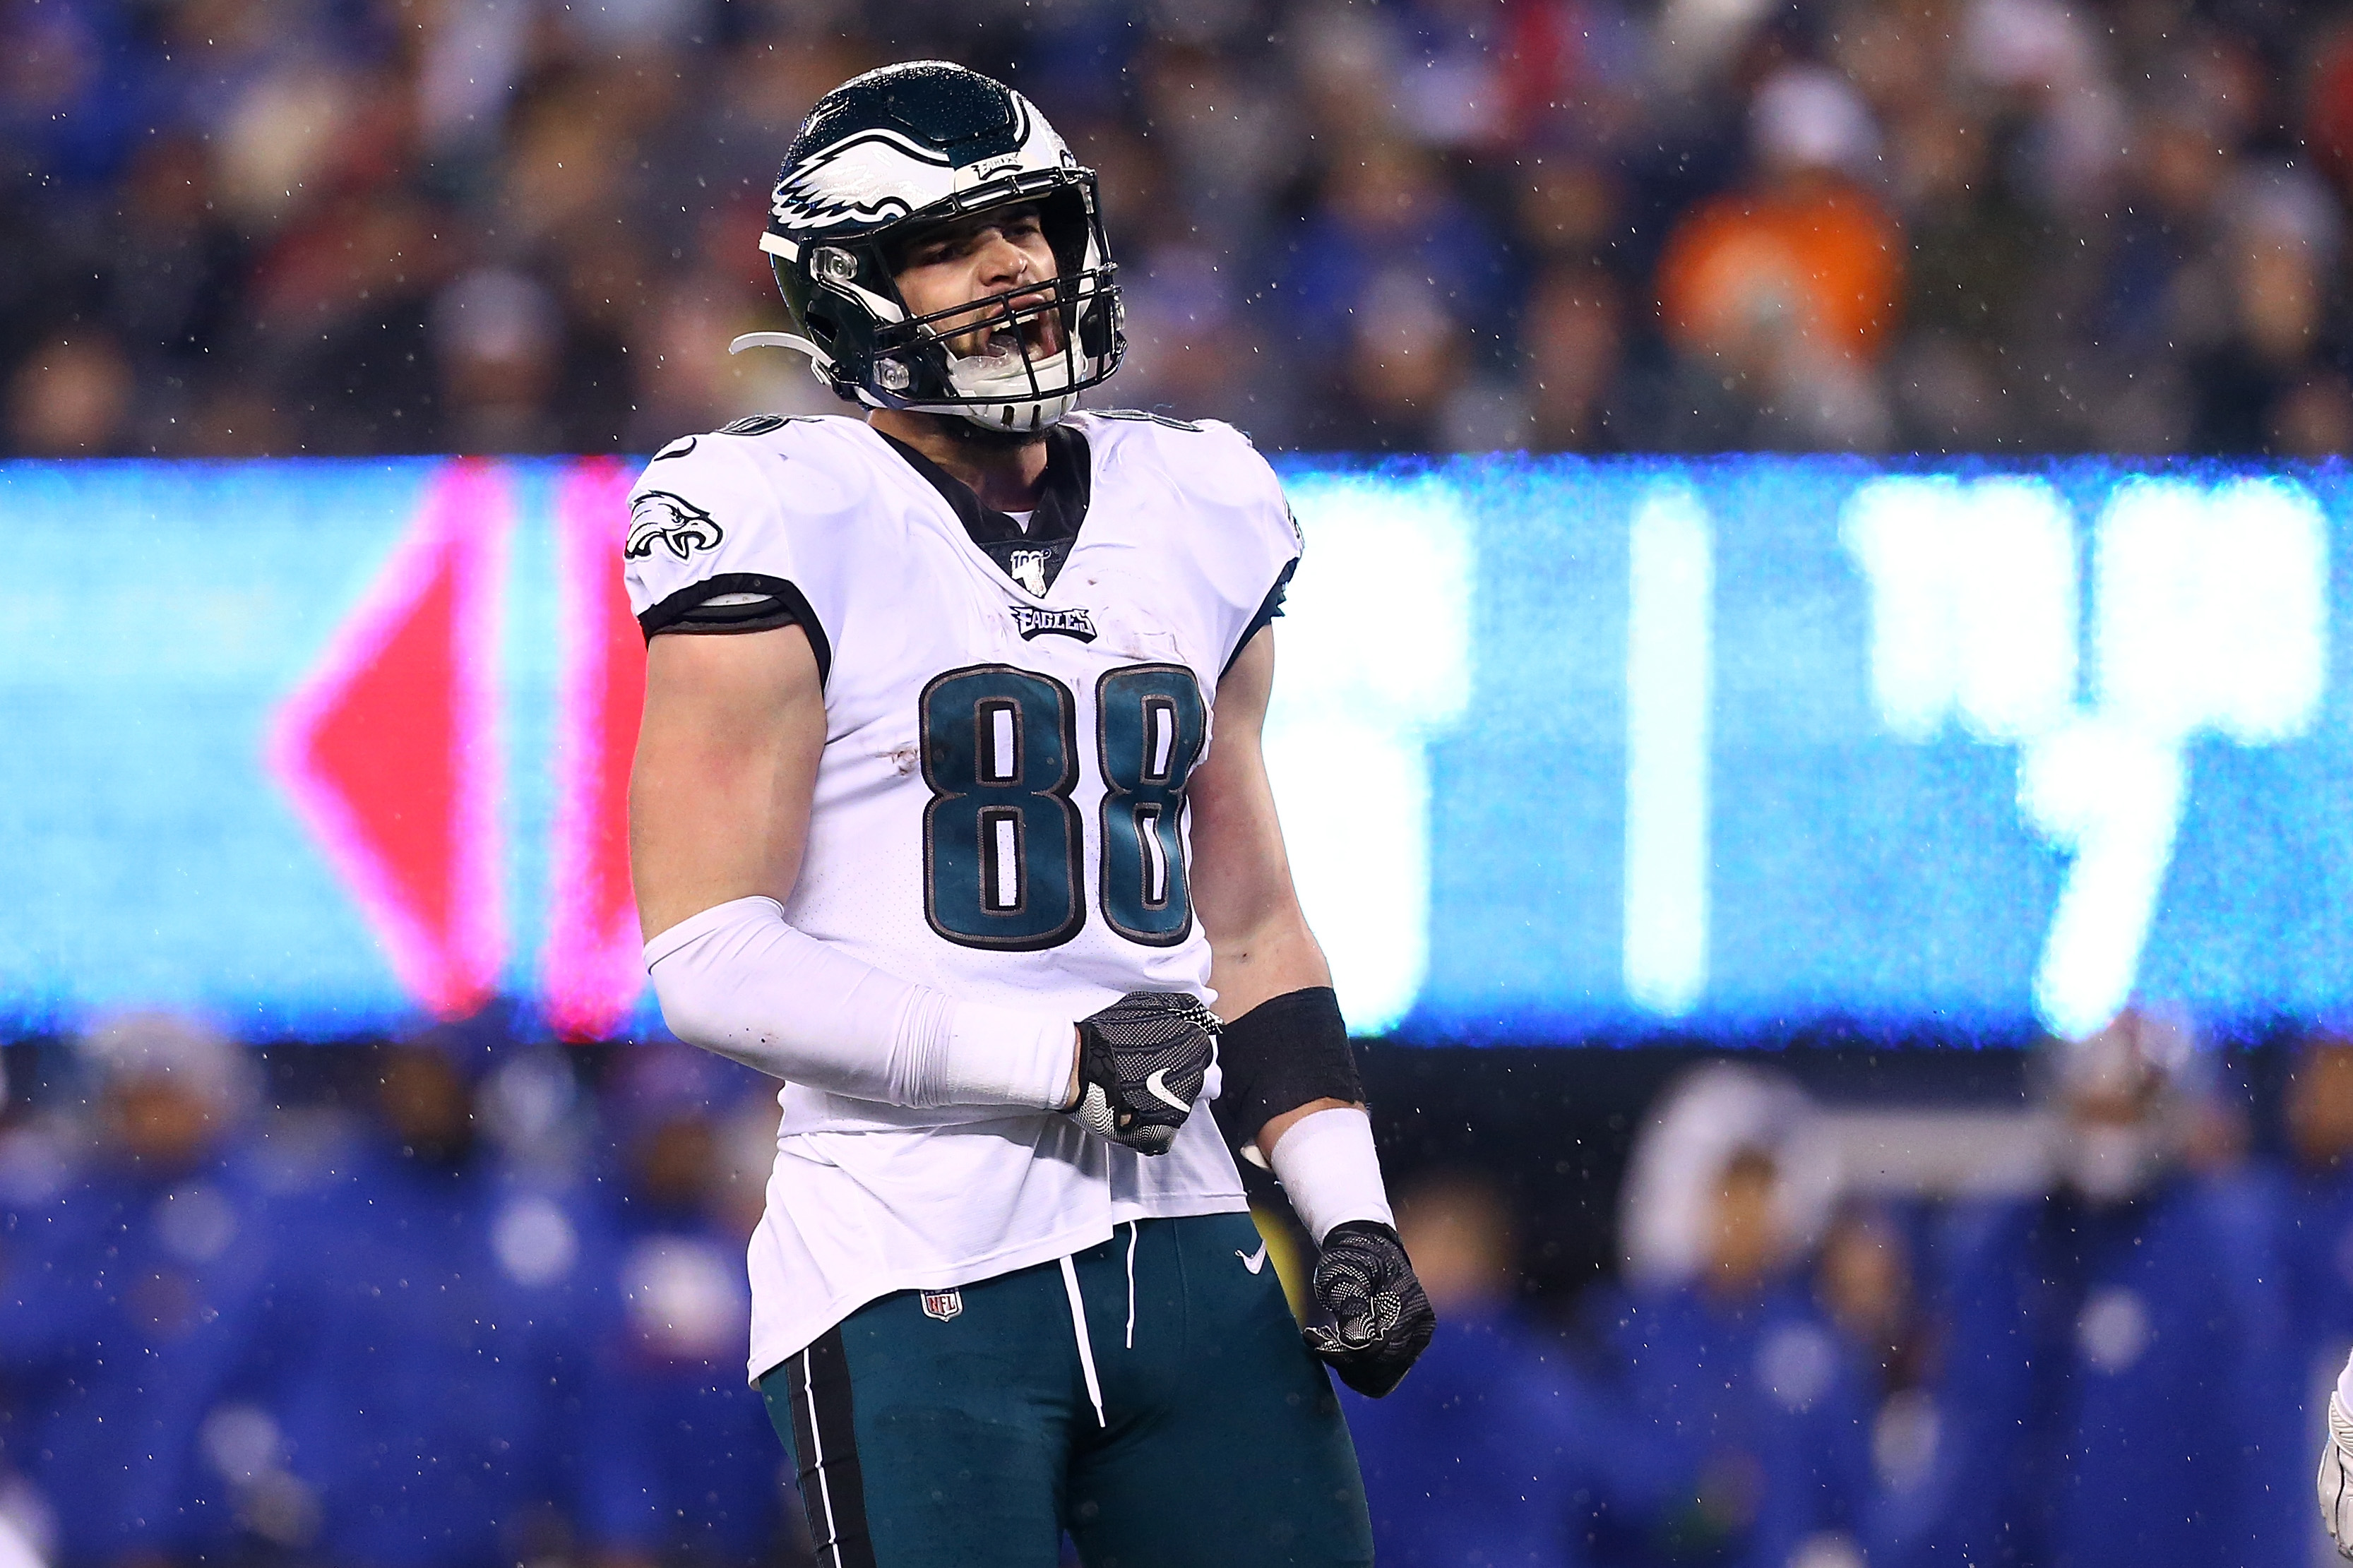 A chilling video of Dallas Goedert getting knocked out cold in a bar surfaced Sunday, and it didn't look great for the Eagles tight end.